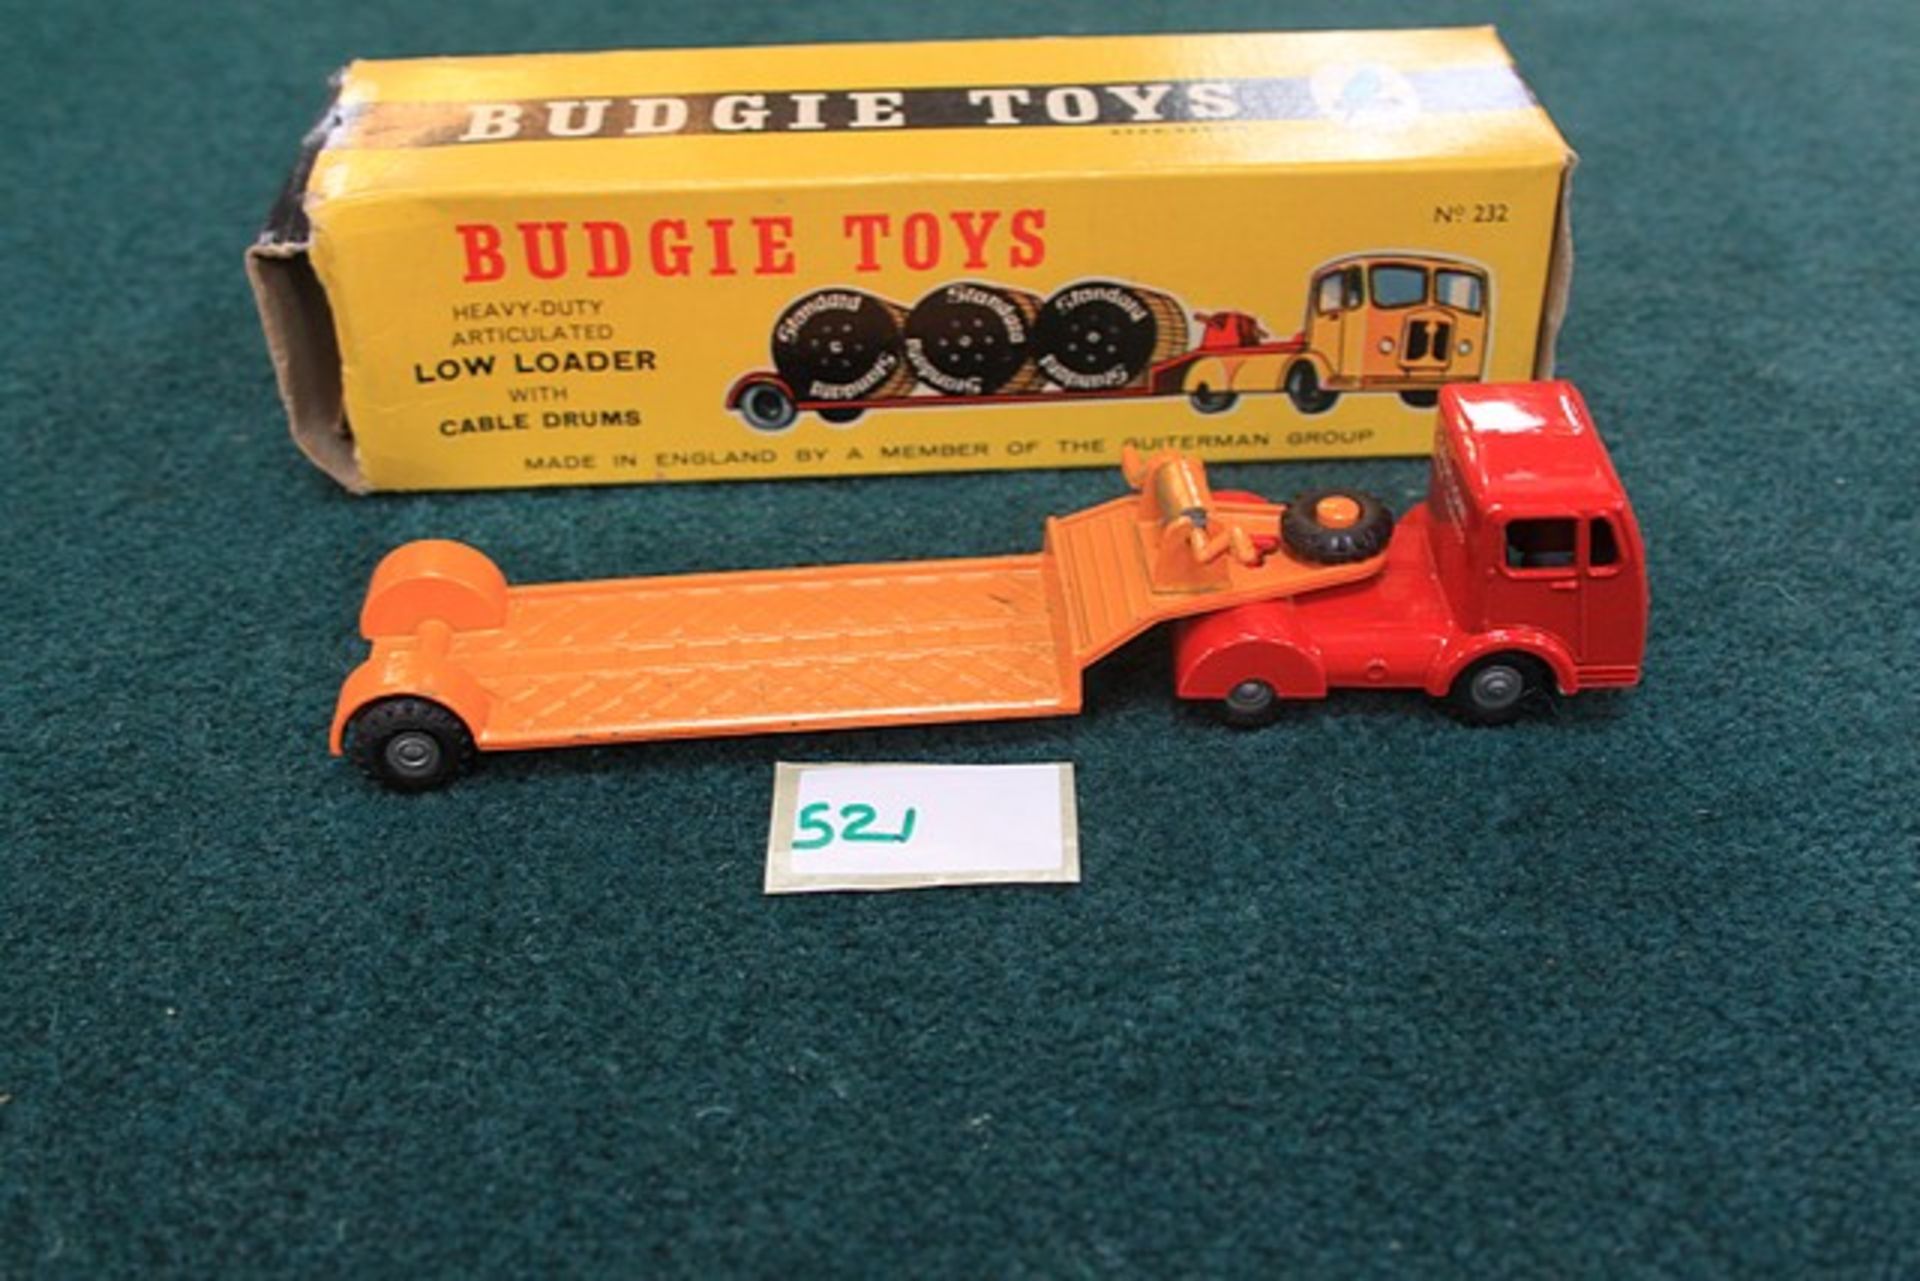 Budgie Diecast # 232 Heavy Duty Articulated Lowe Loader (Without Cable Drums) Complete With Box